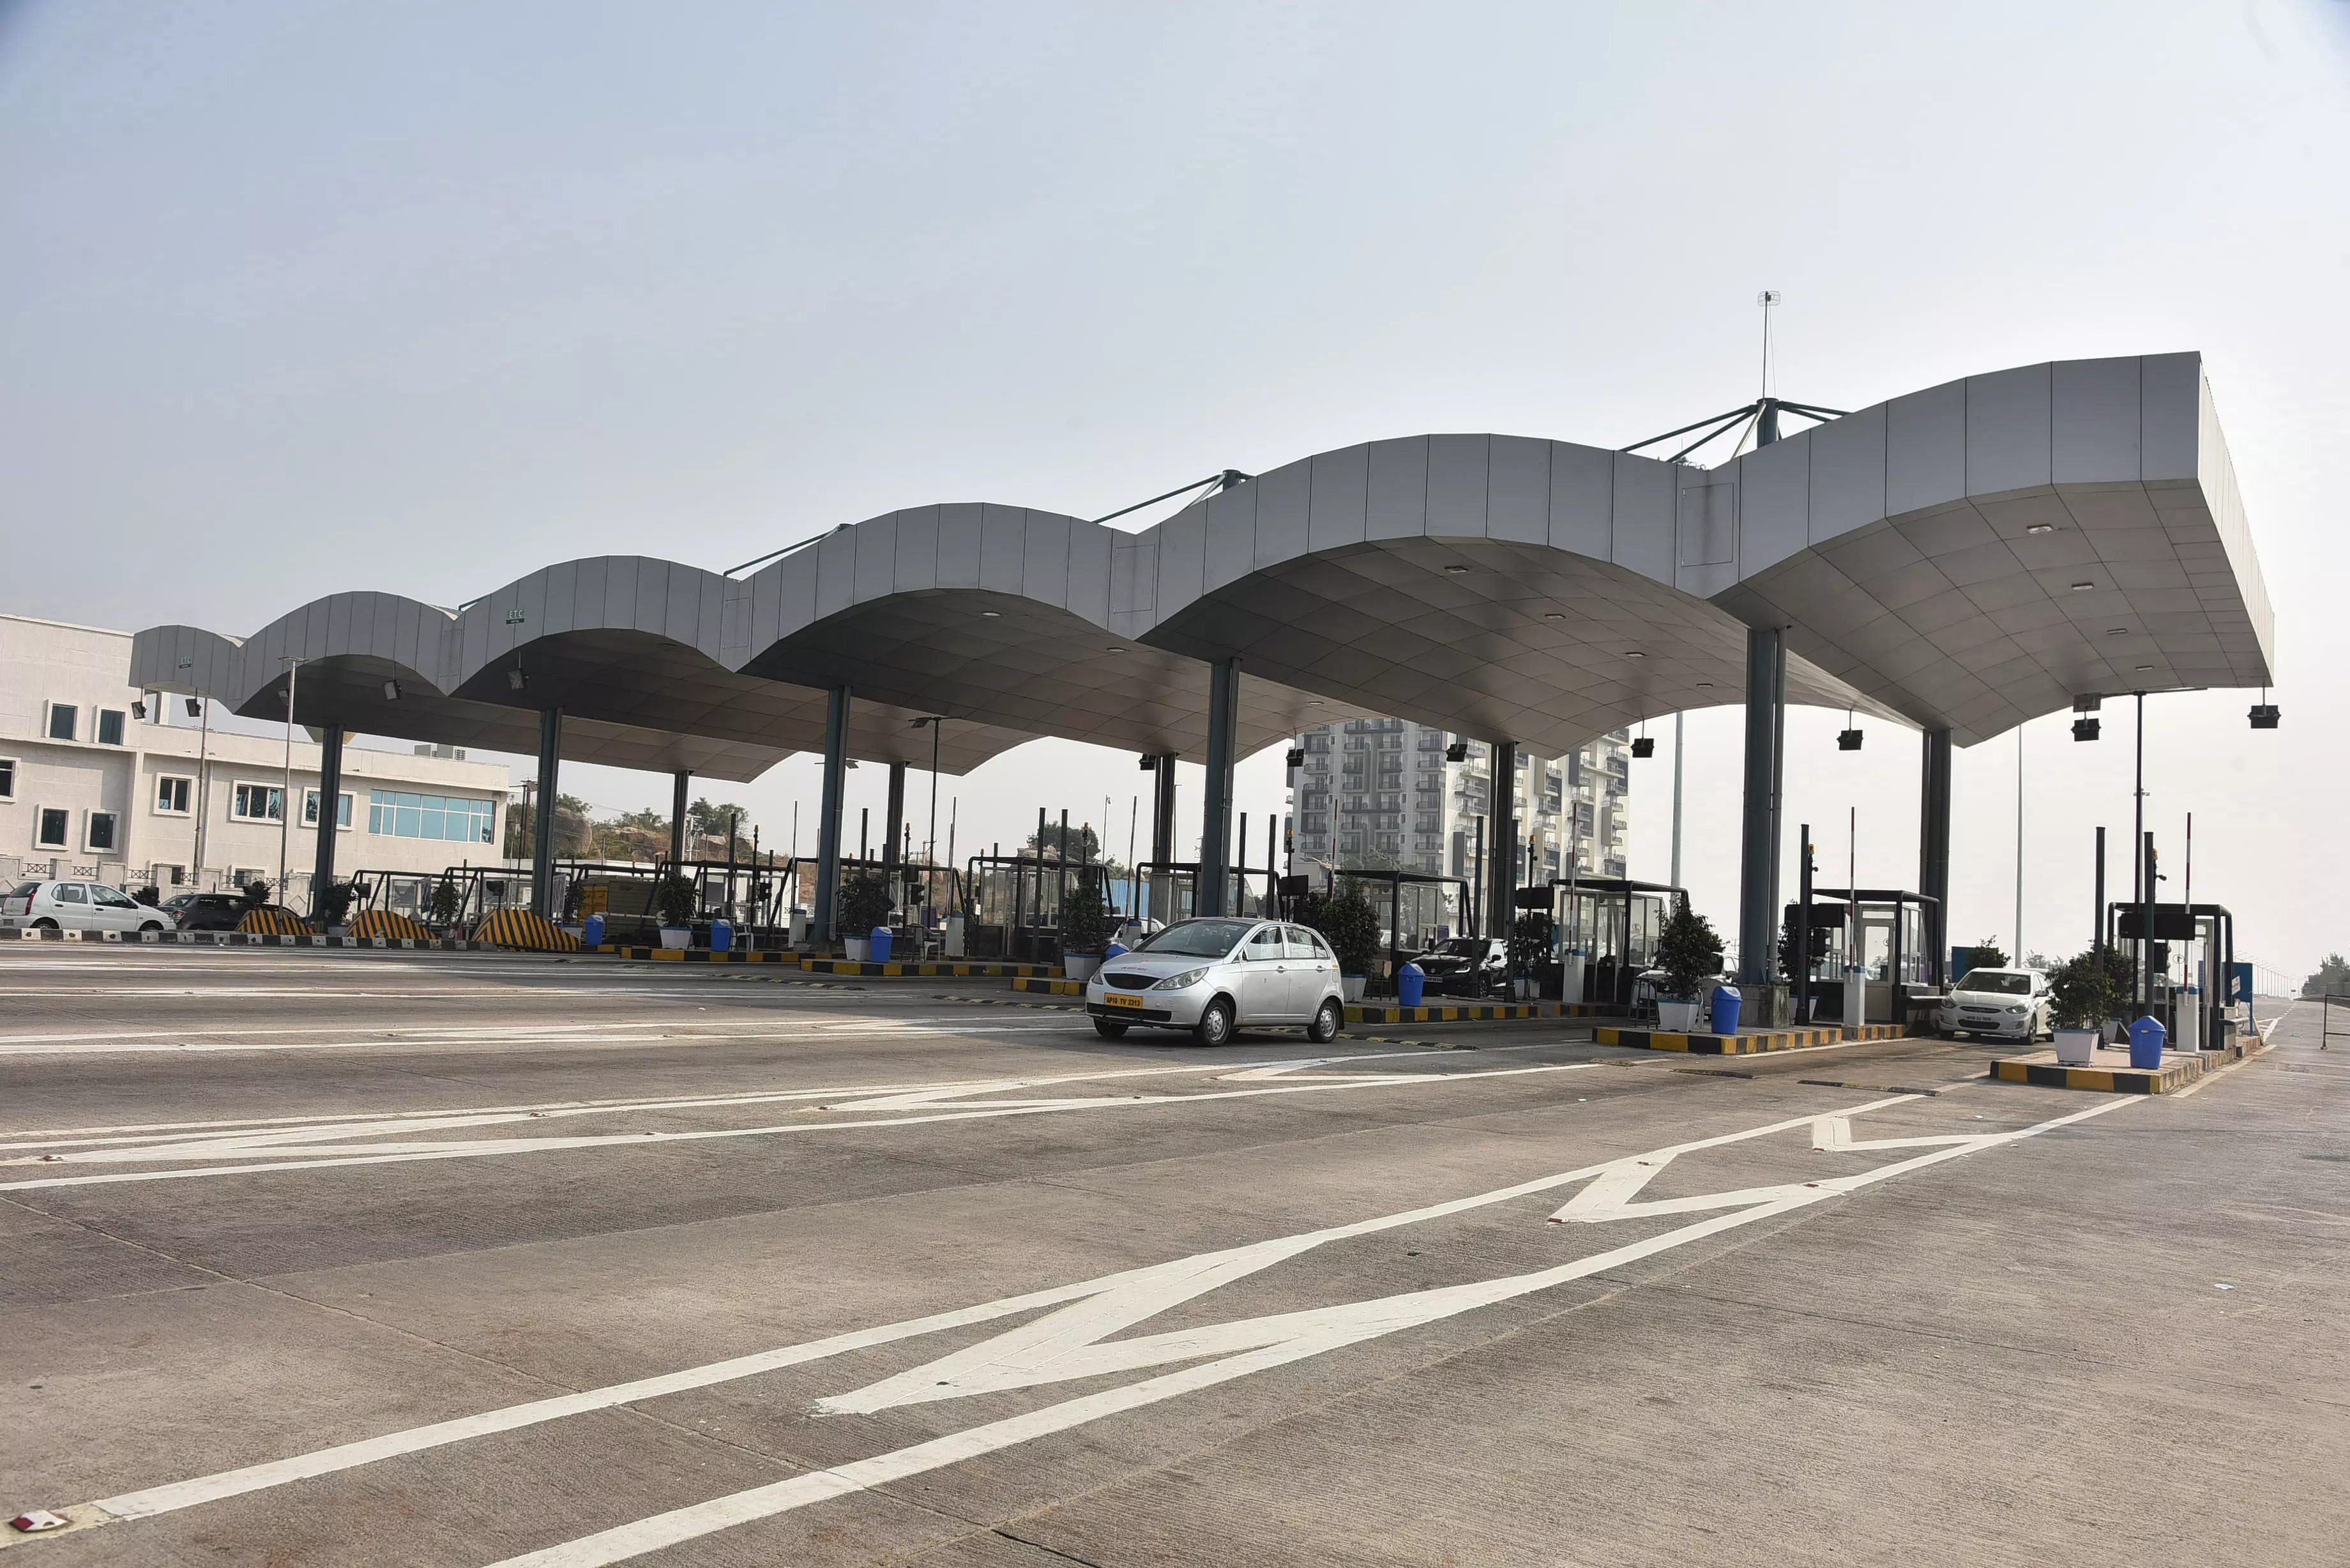 Understanding the Psychological Dynamics Behind Attacks on Toll Plaza Workers in India